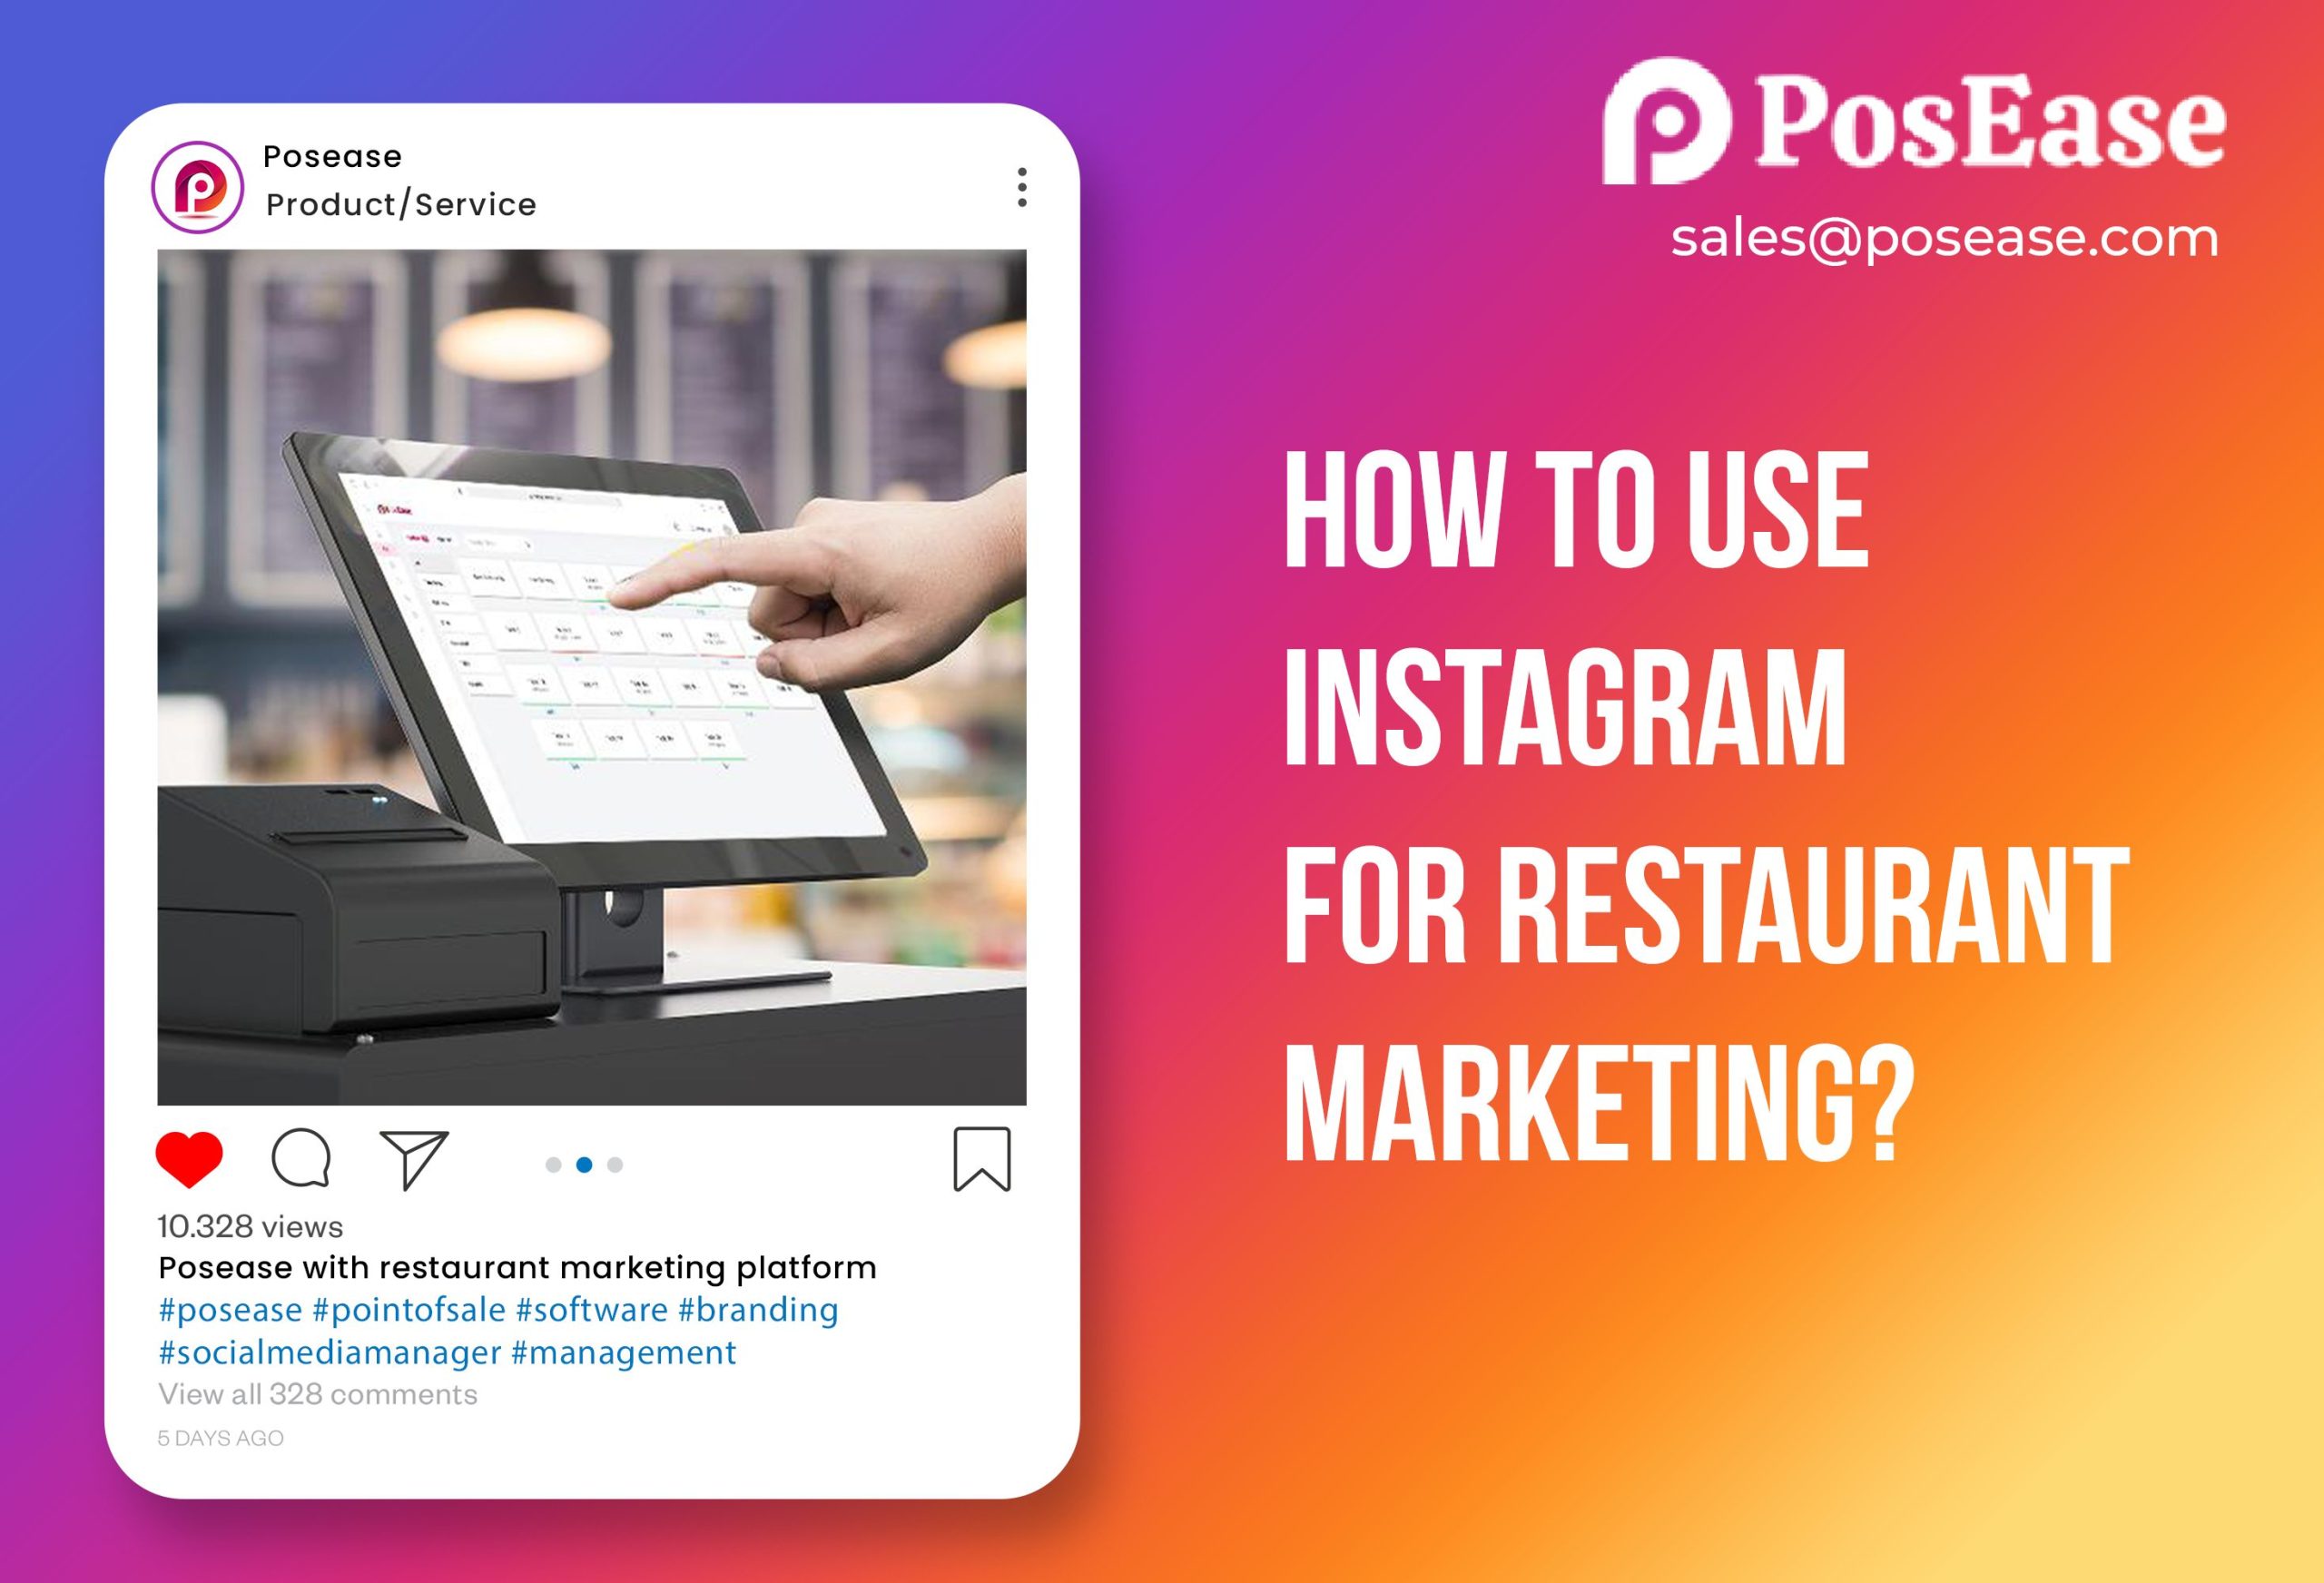 How to use Instagram for restaurant marketing?